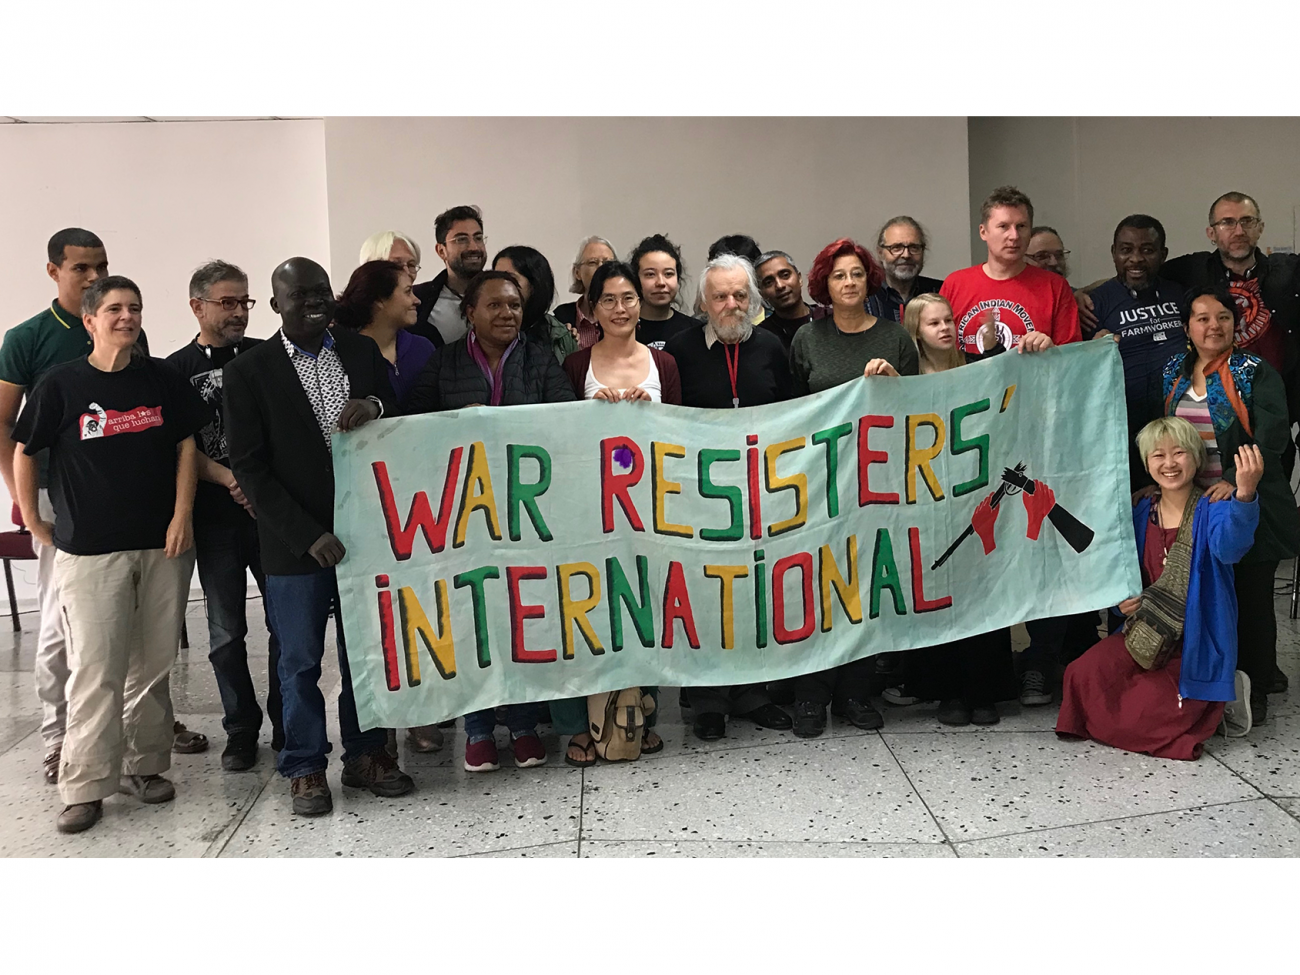 Two dozen people stand behind a banner reading "War Resisters' International"